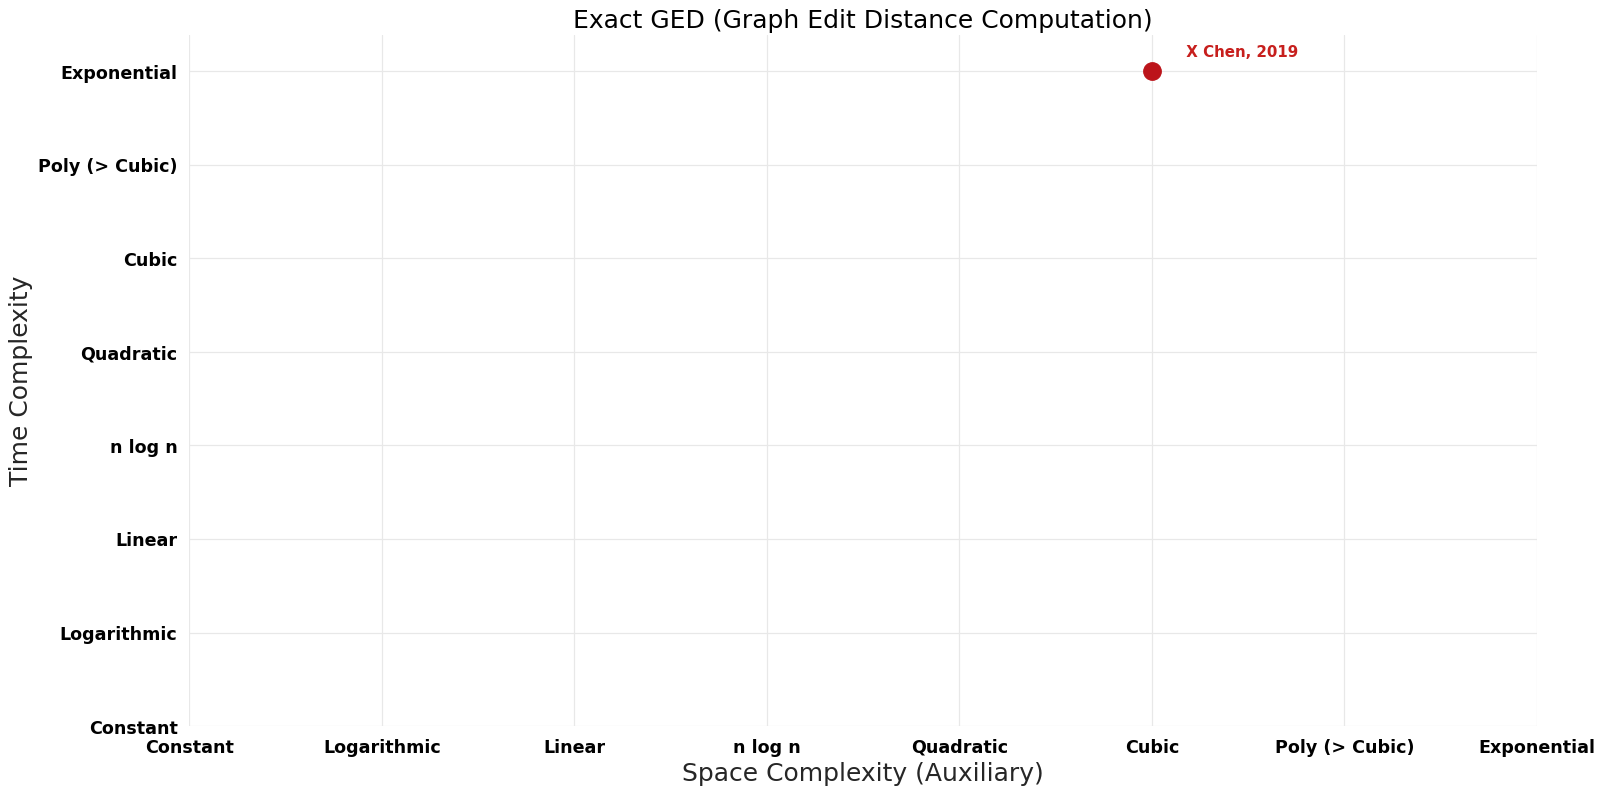 File:Graph Edit Distance Computation - Exact GED - Pareto Frontier.png